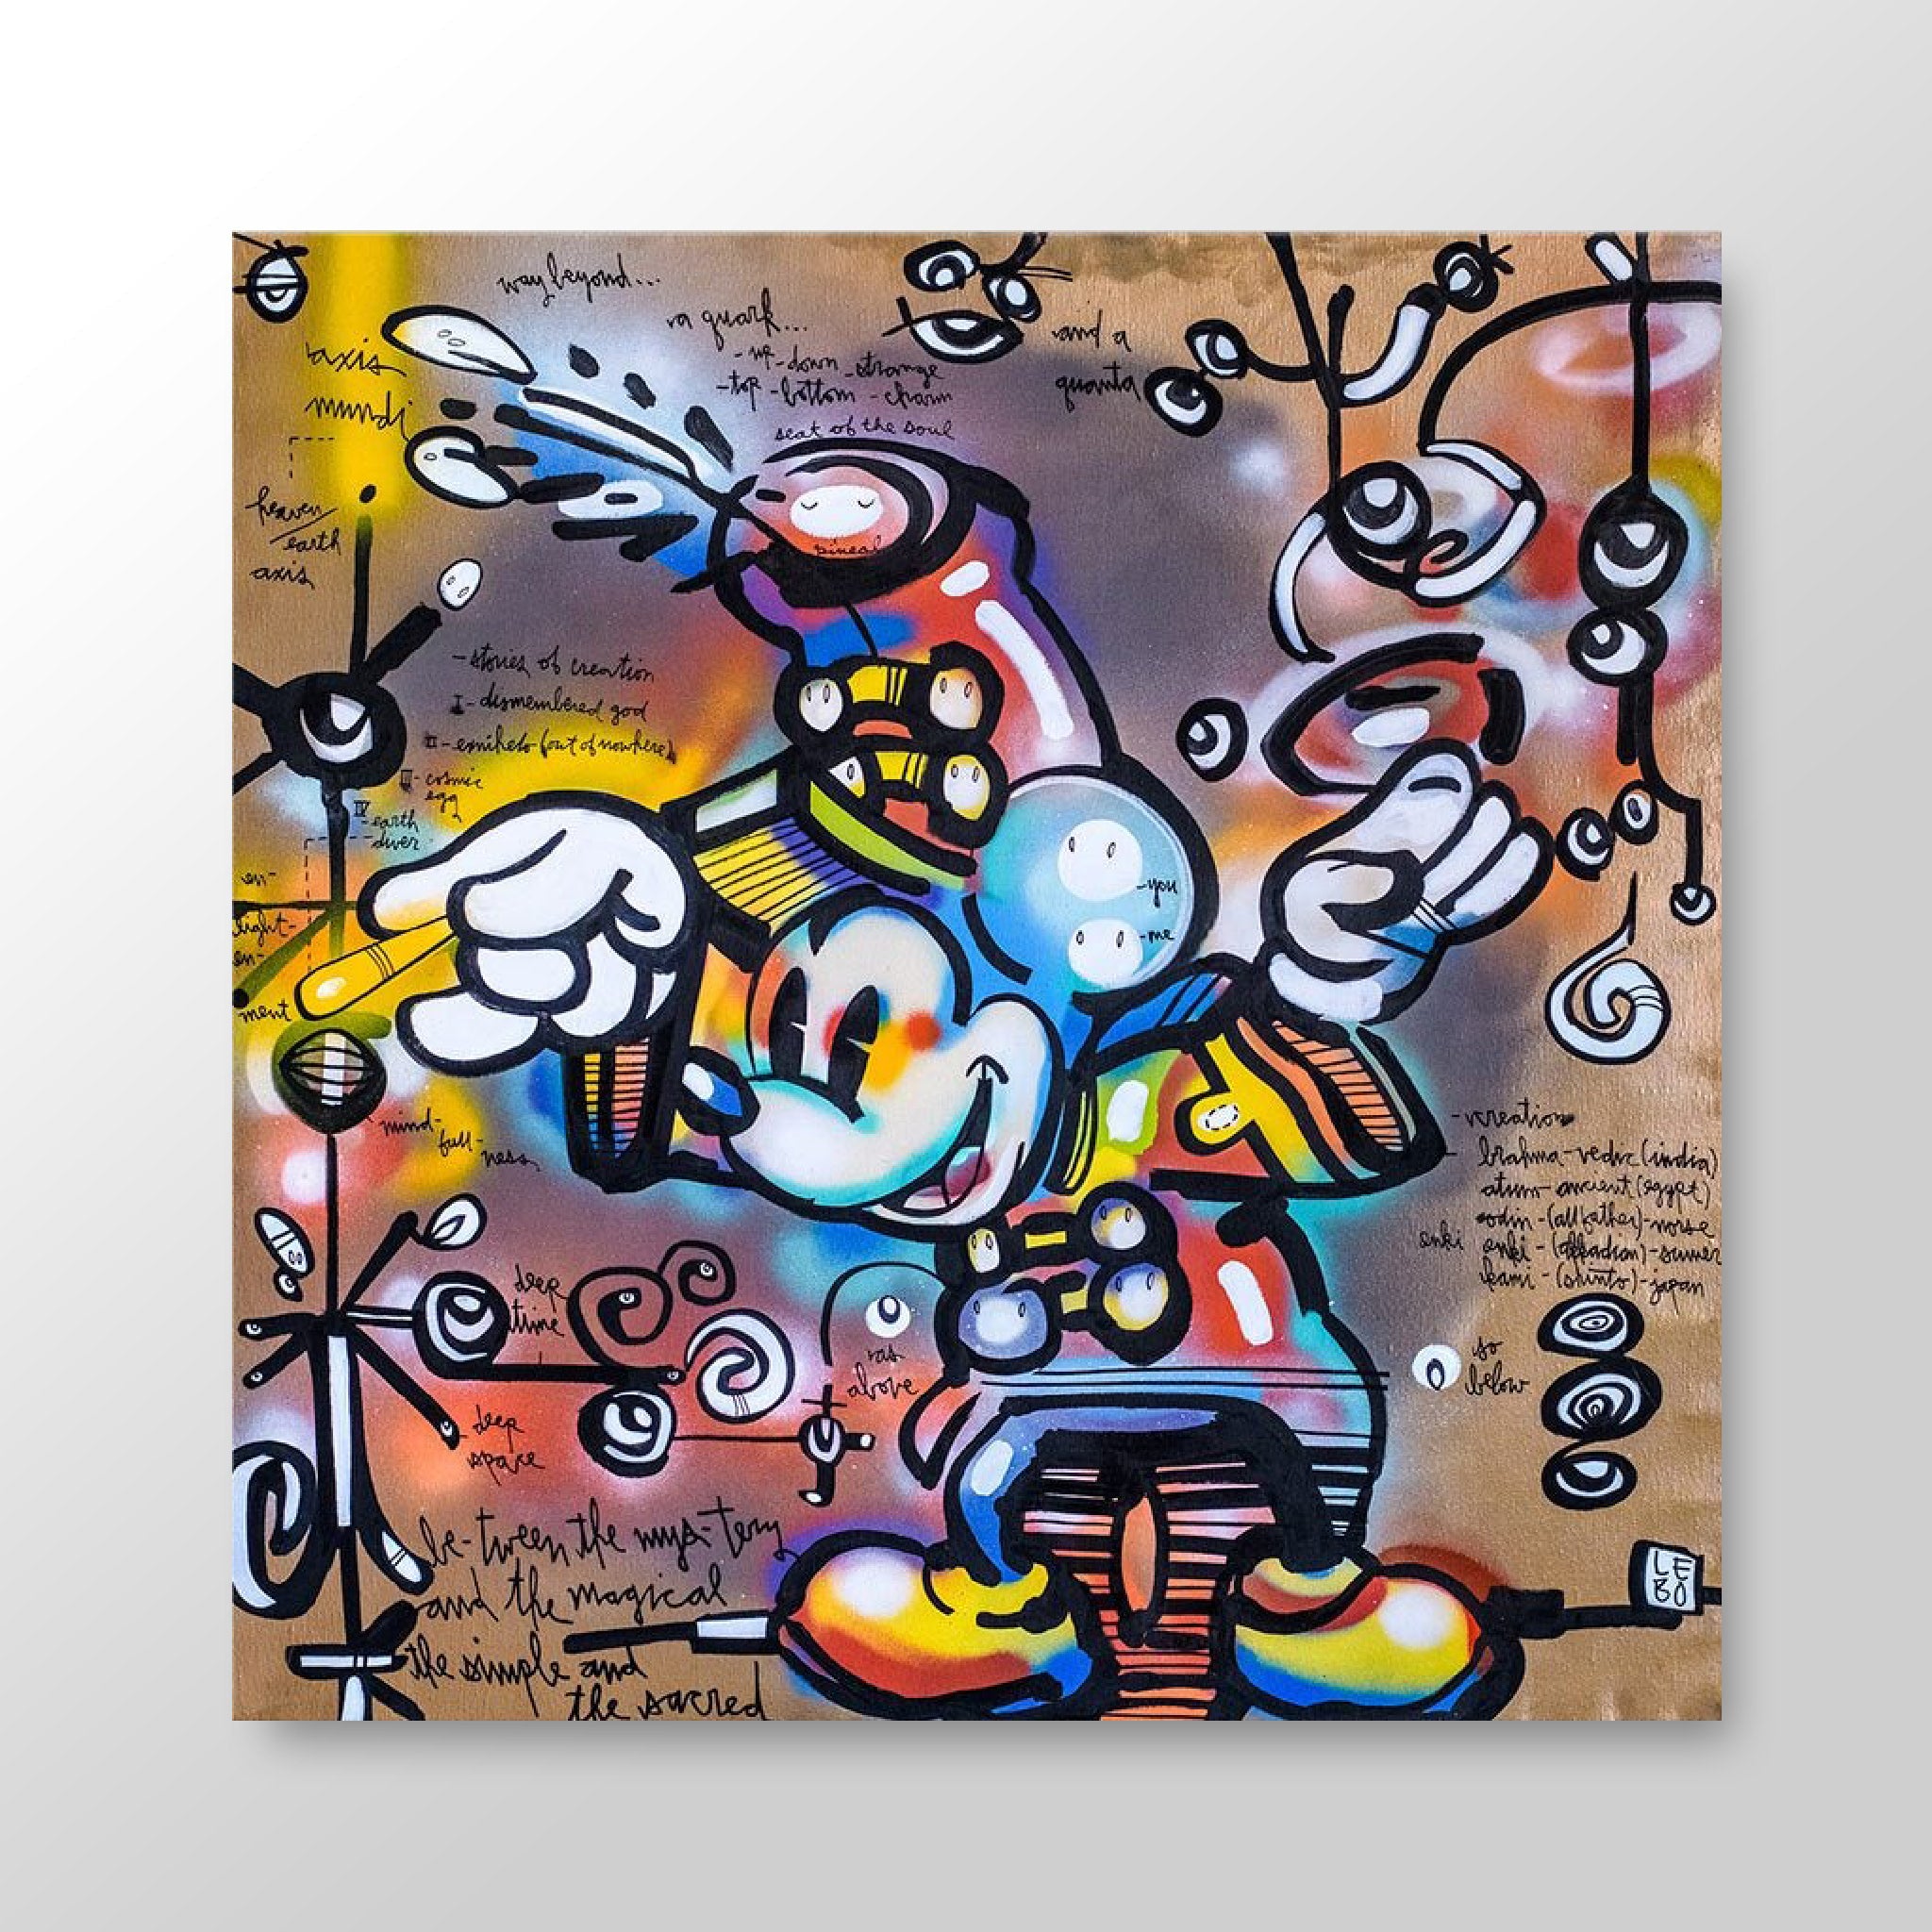 Between The Mystery and The Magical - Lebo Brushed Aluminum Art Bond